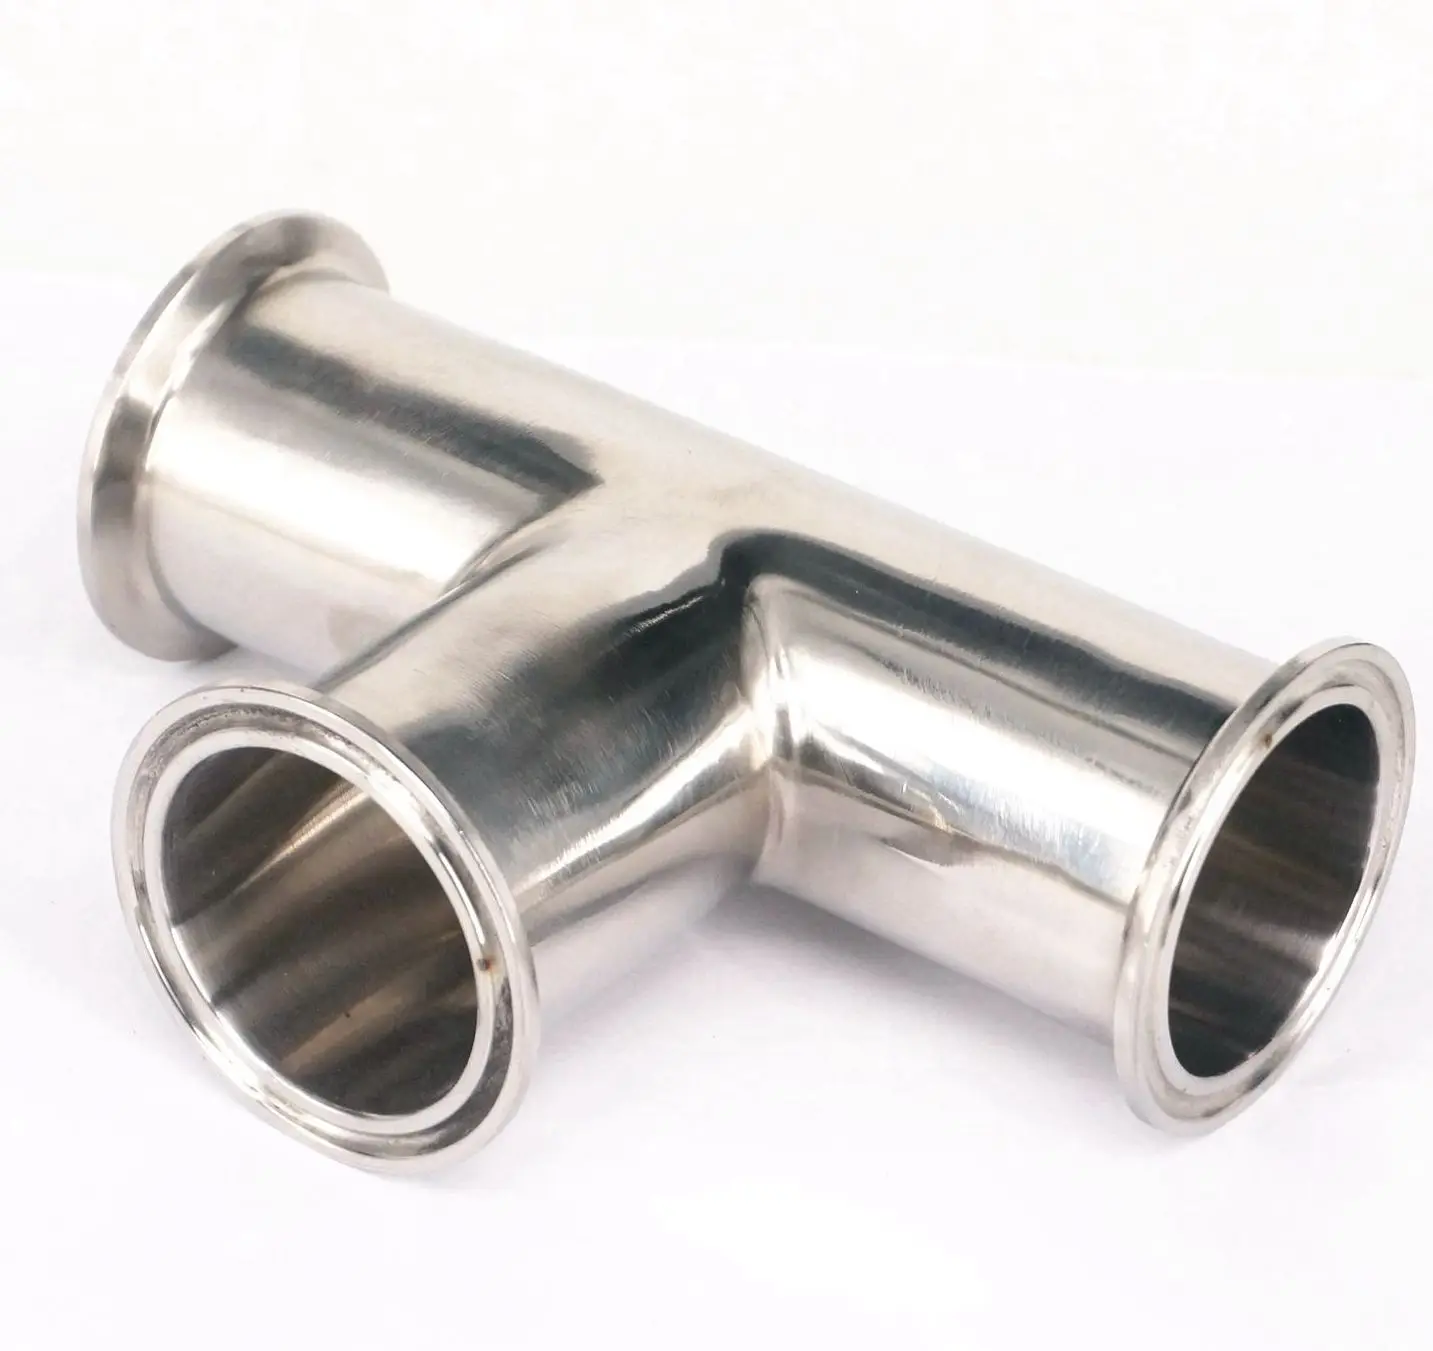 

Tube O/D 32mm Tri Clamp 1.5" Ferrule Tee 304 Stainless Steel Sanitary Connector Pipe Fitting